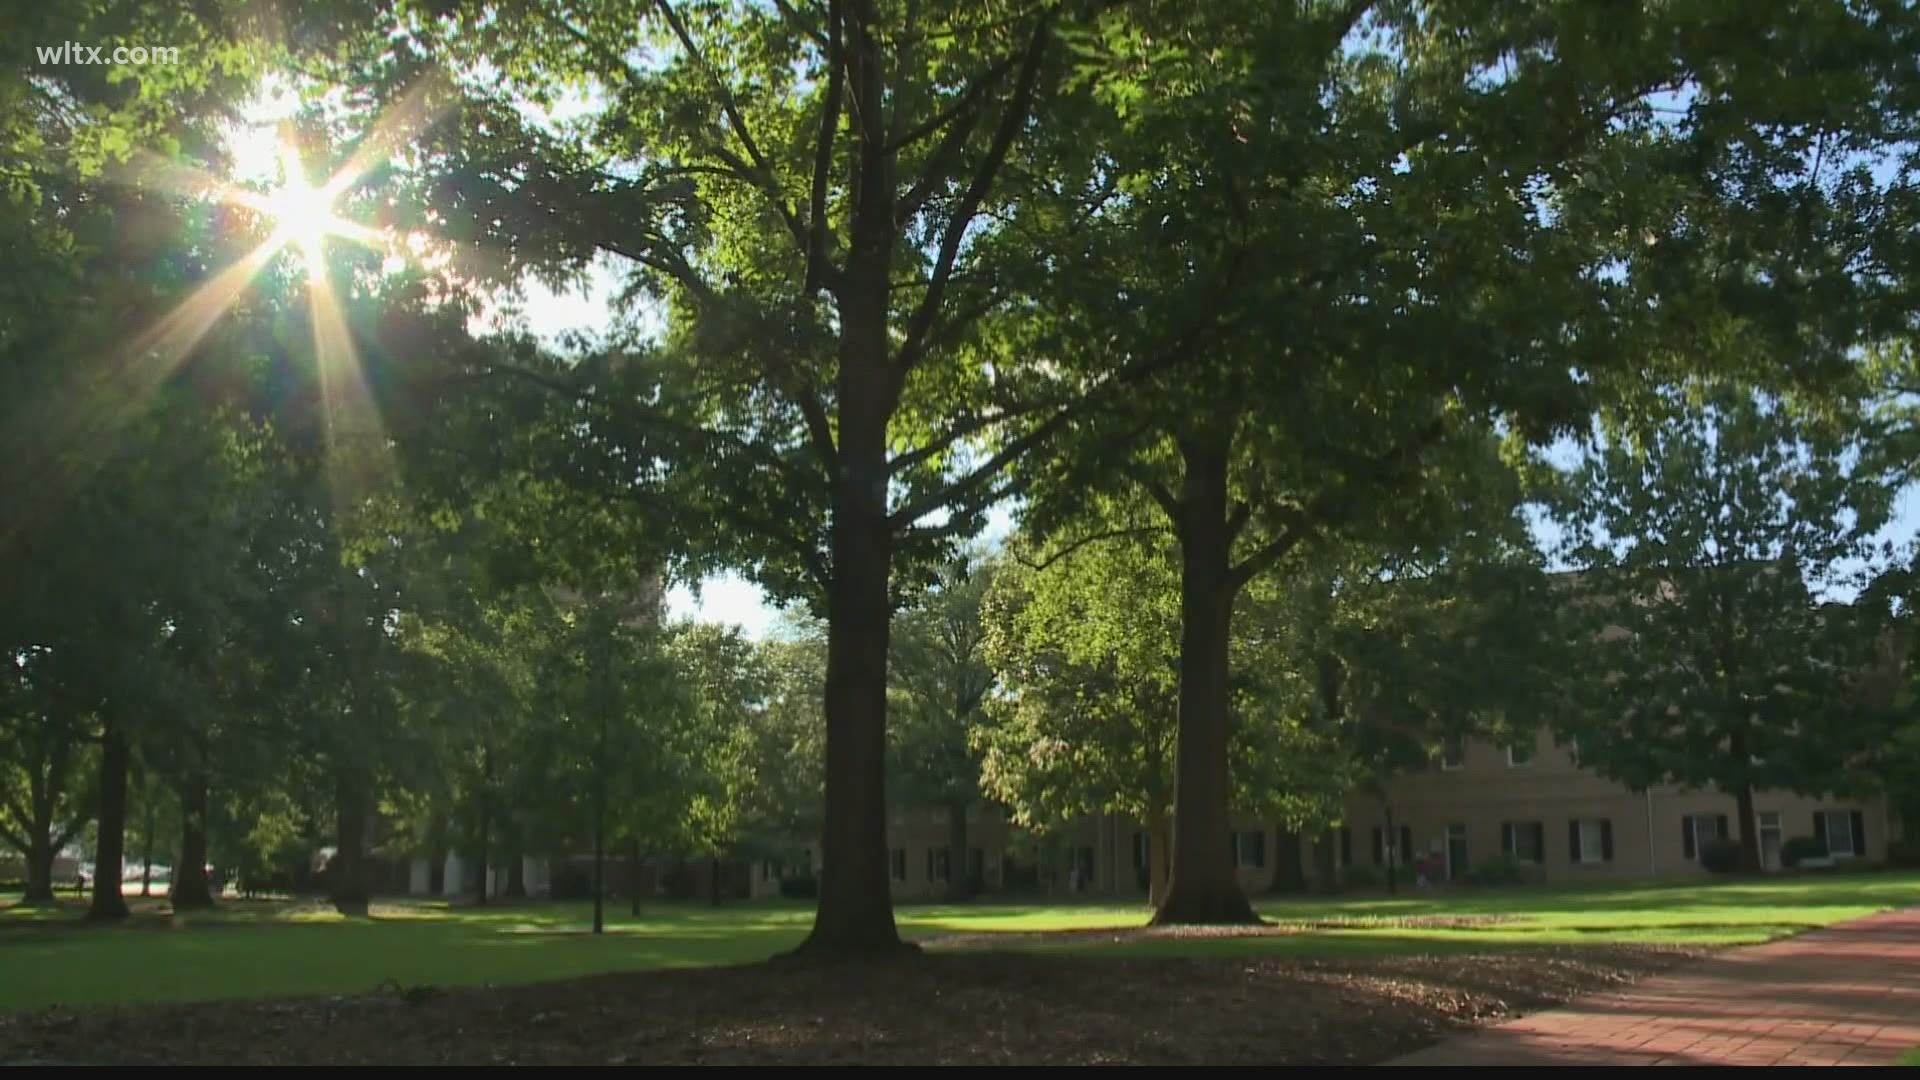 Students at the University of South Carolina will be required to get at least one COVID test per month.